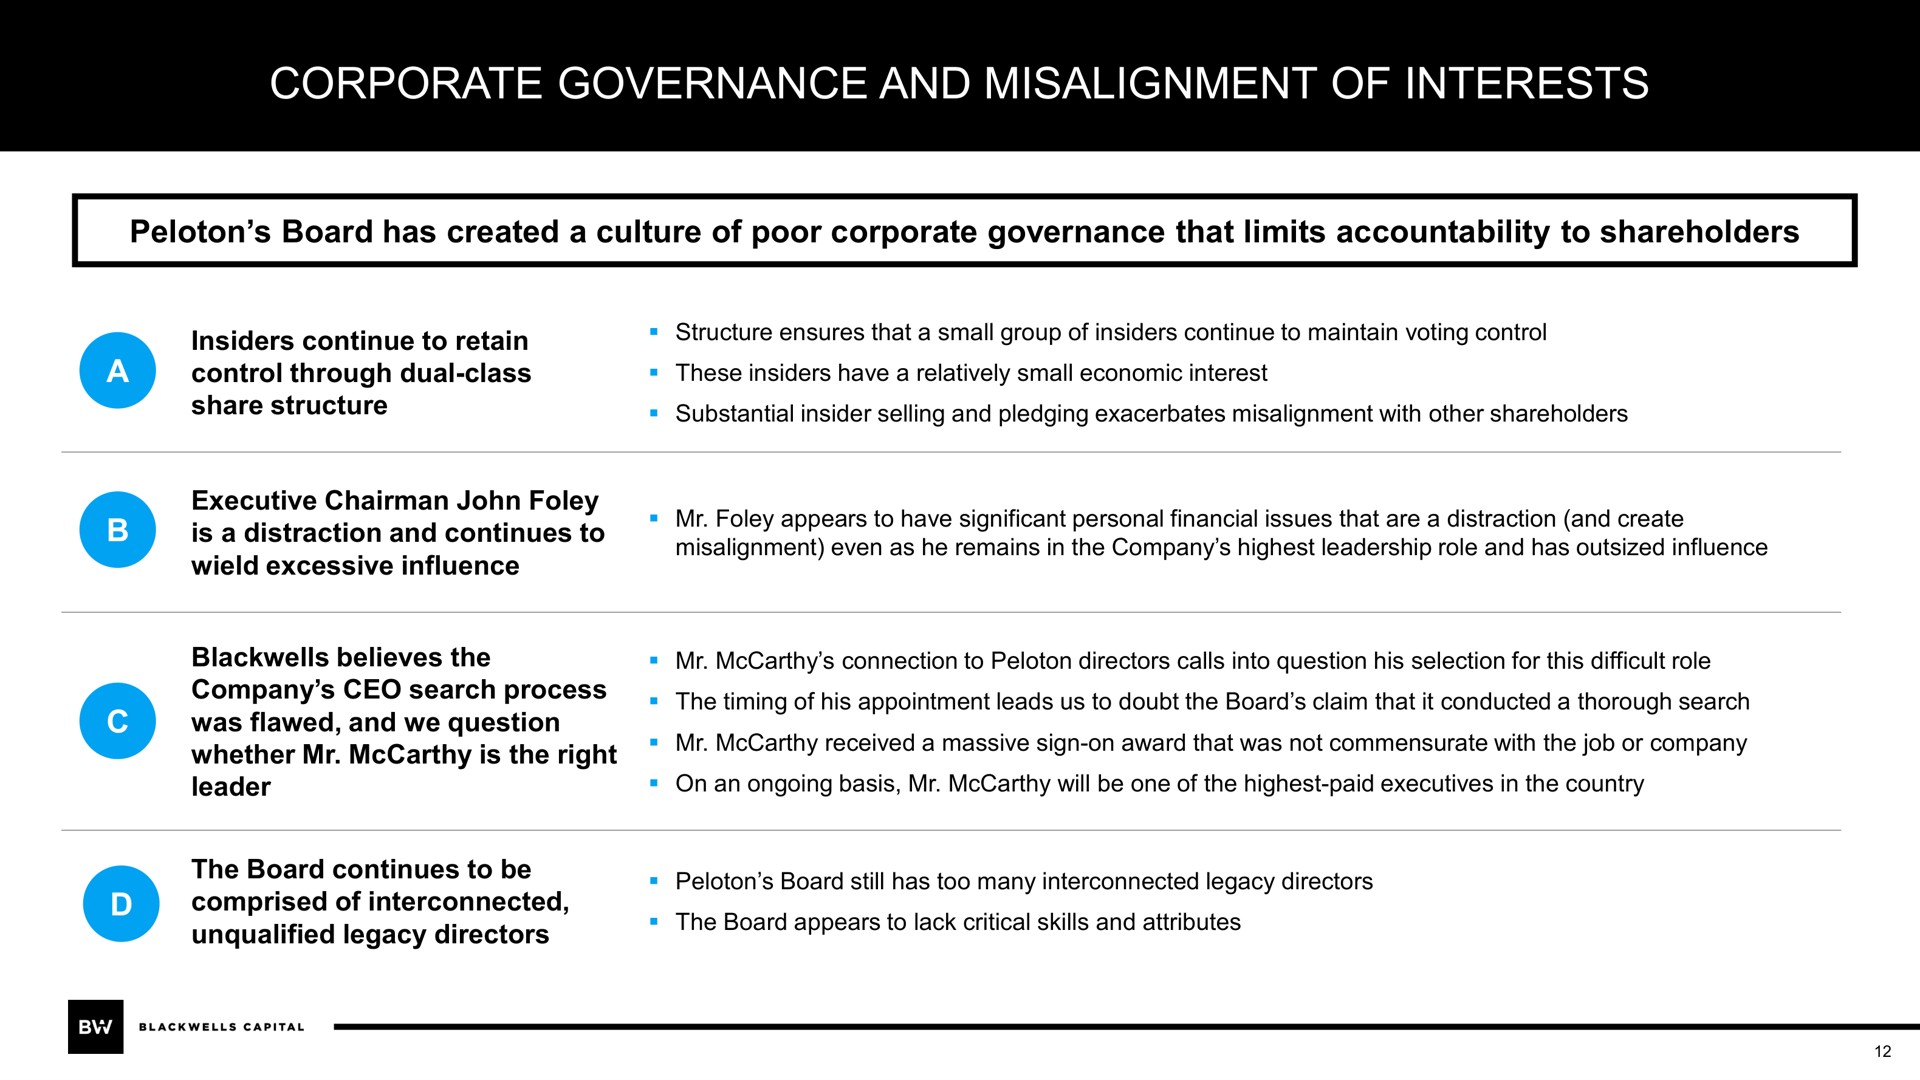 corporate governance and misalignment of interests | Blackwells Capital